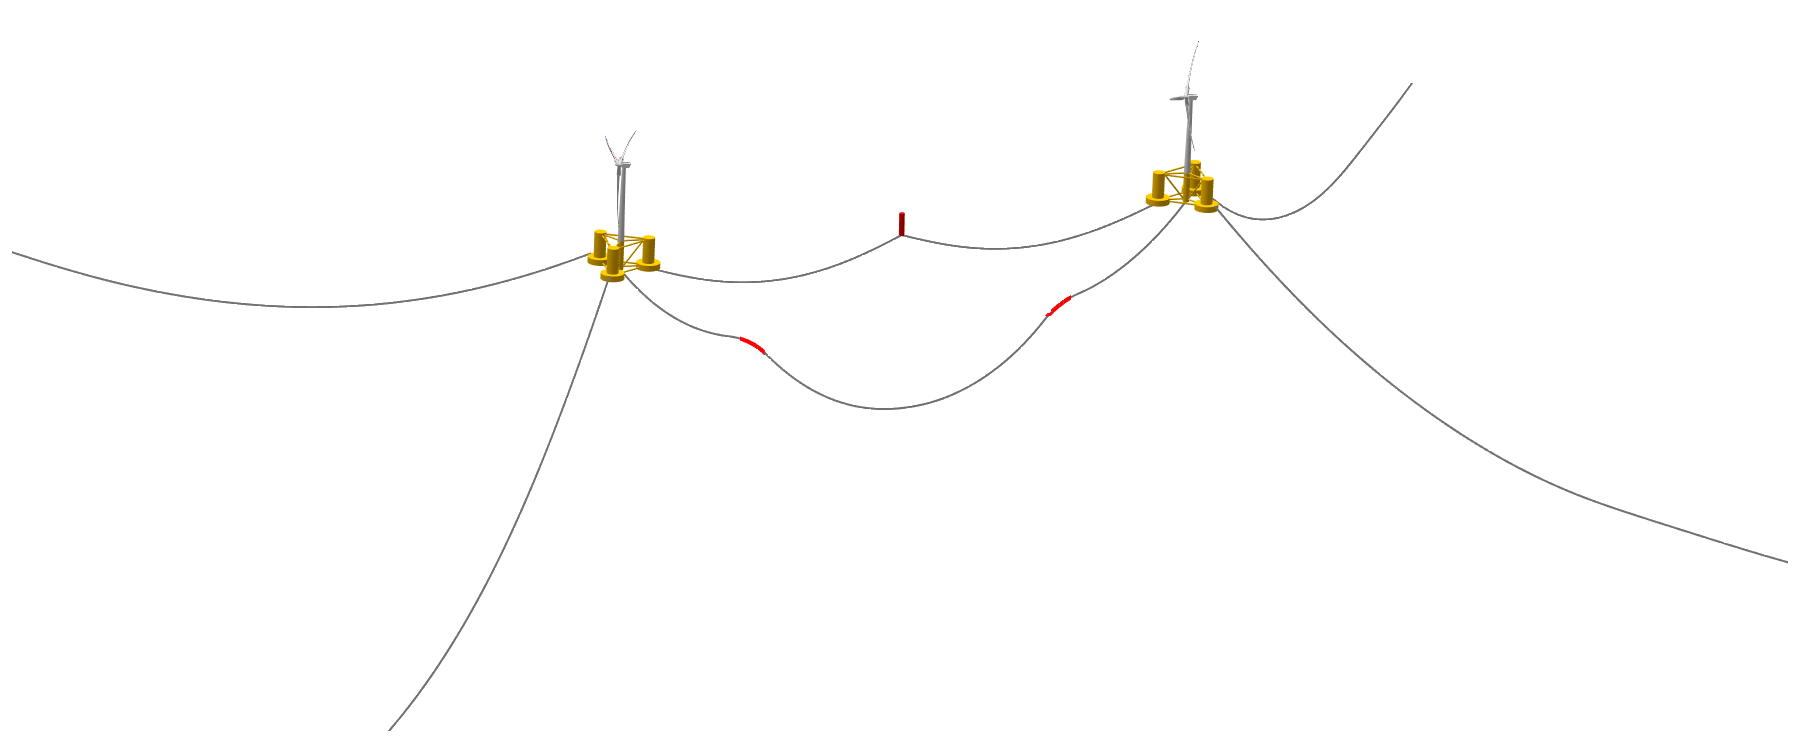 A global mooring definition, connecting two turbines in a multi turbine simulation.